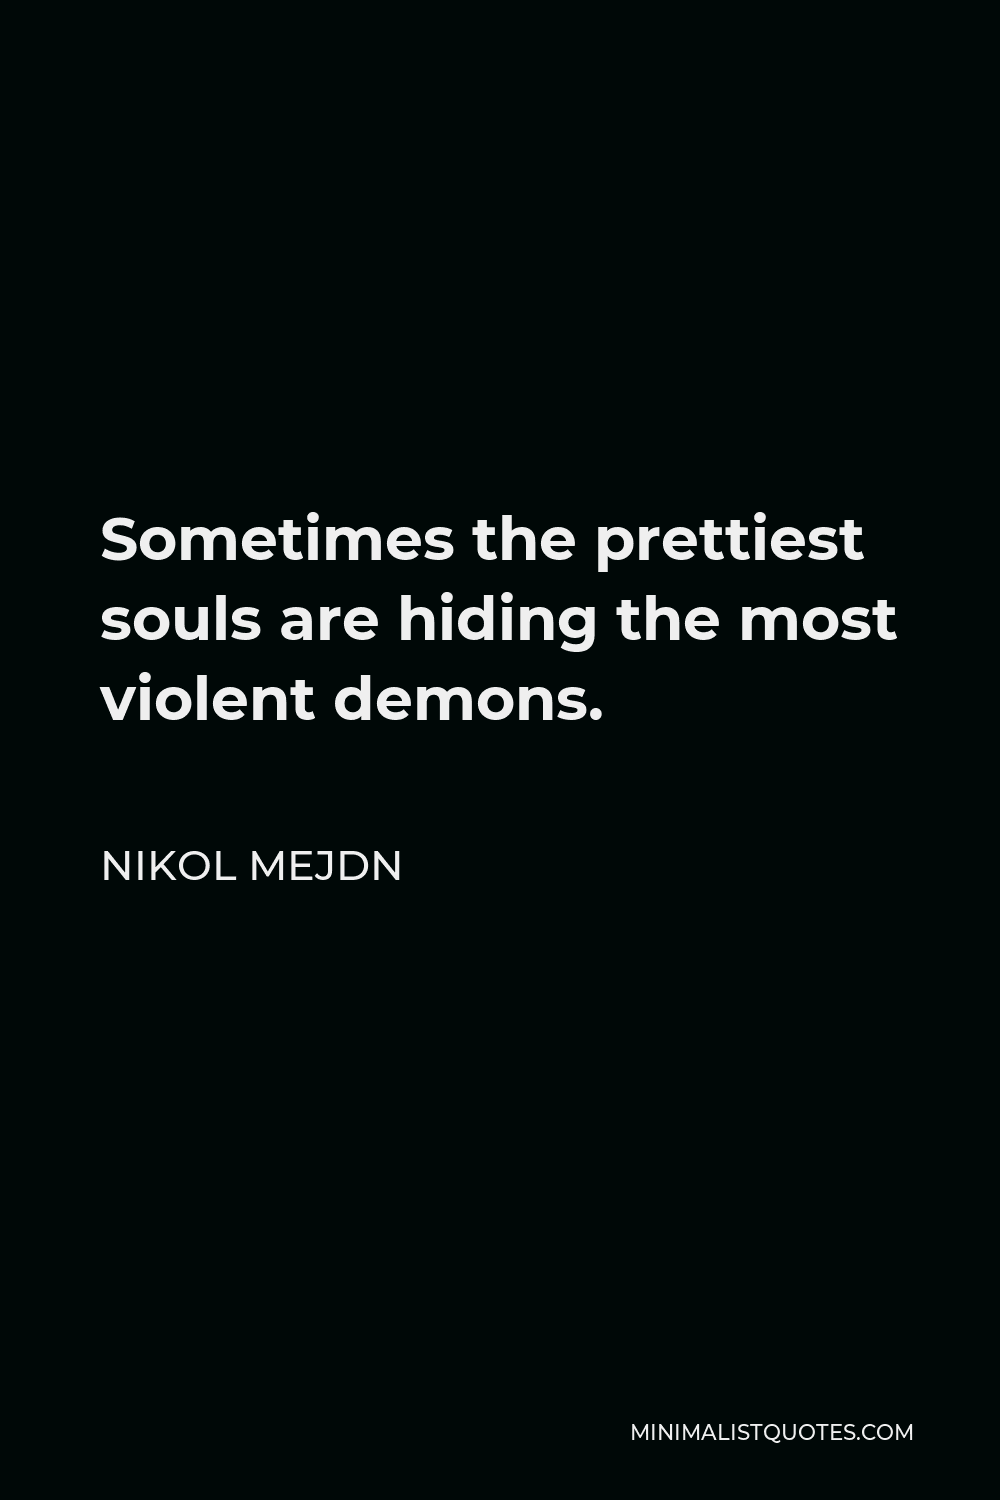 Nikol Mejdn Quote - Sometimes the prettiest souls are hiding the most violent demons.